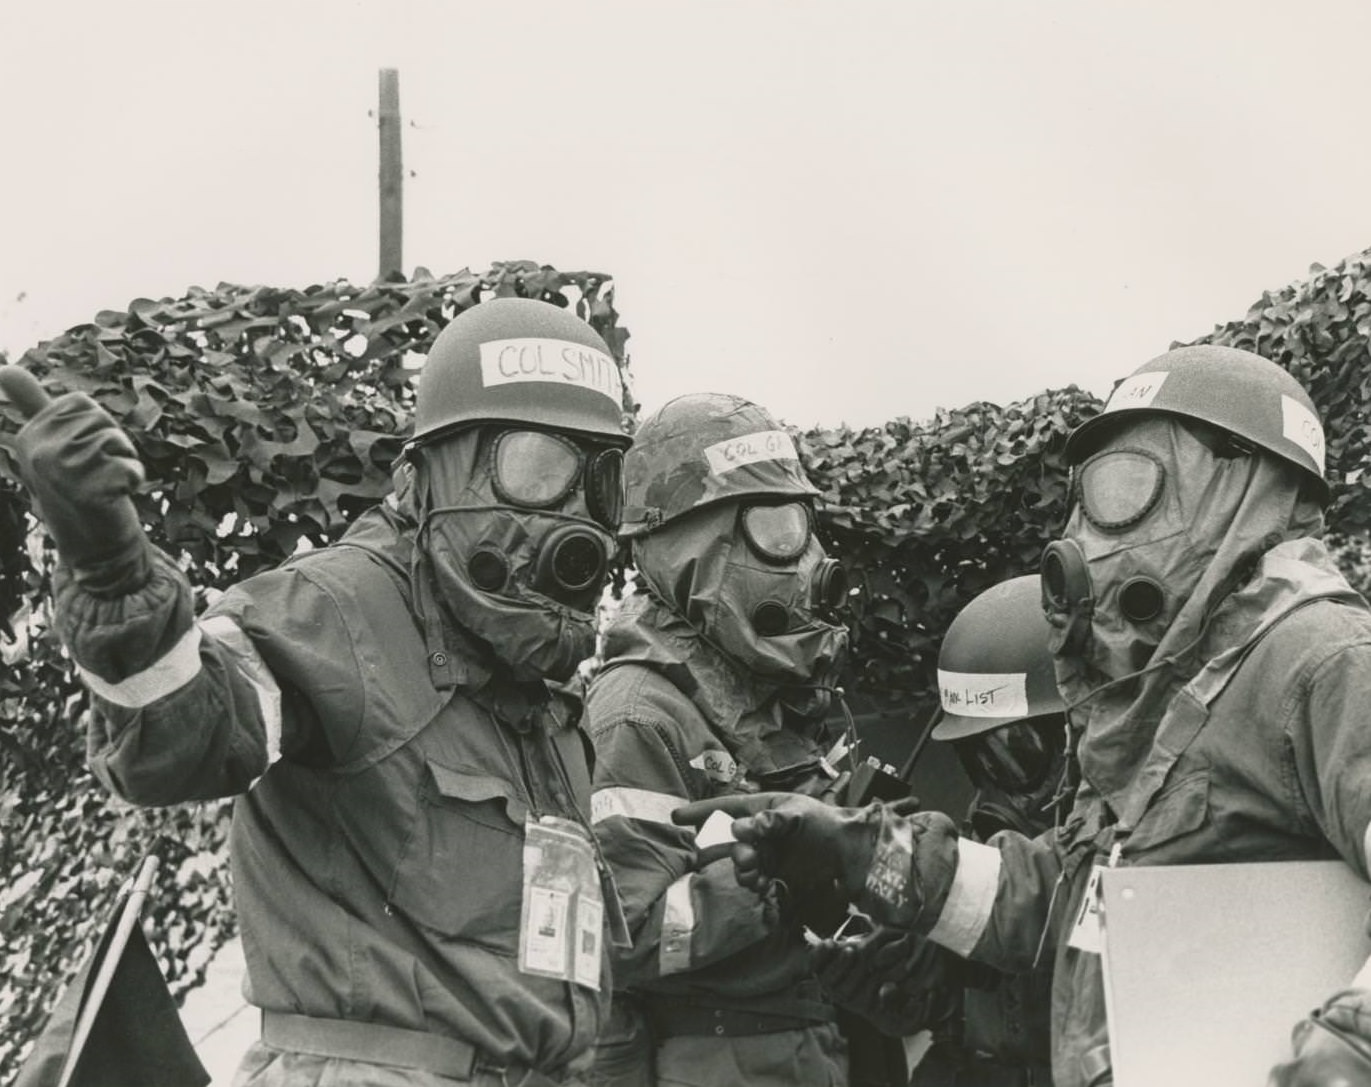 Several officers in gas masks standing together during a mock casualties and chemical warfare exercise at the Bergstrom Air Force Base, 1973